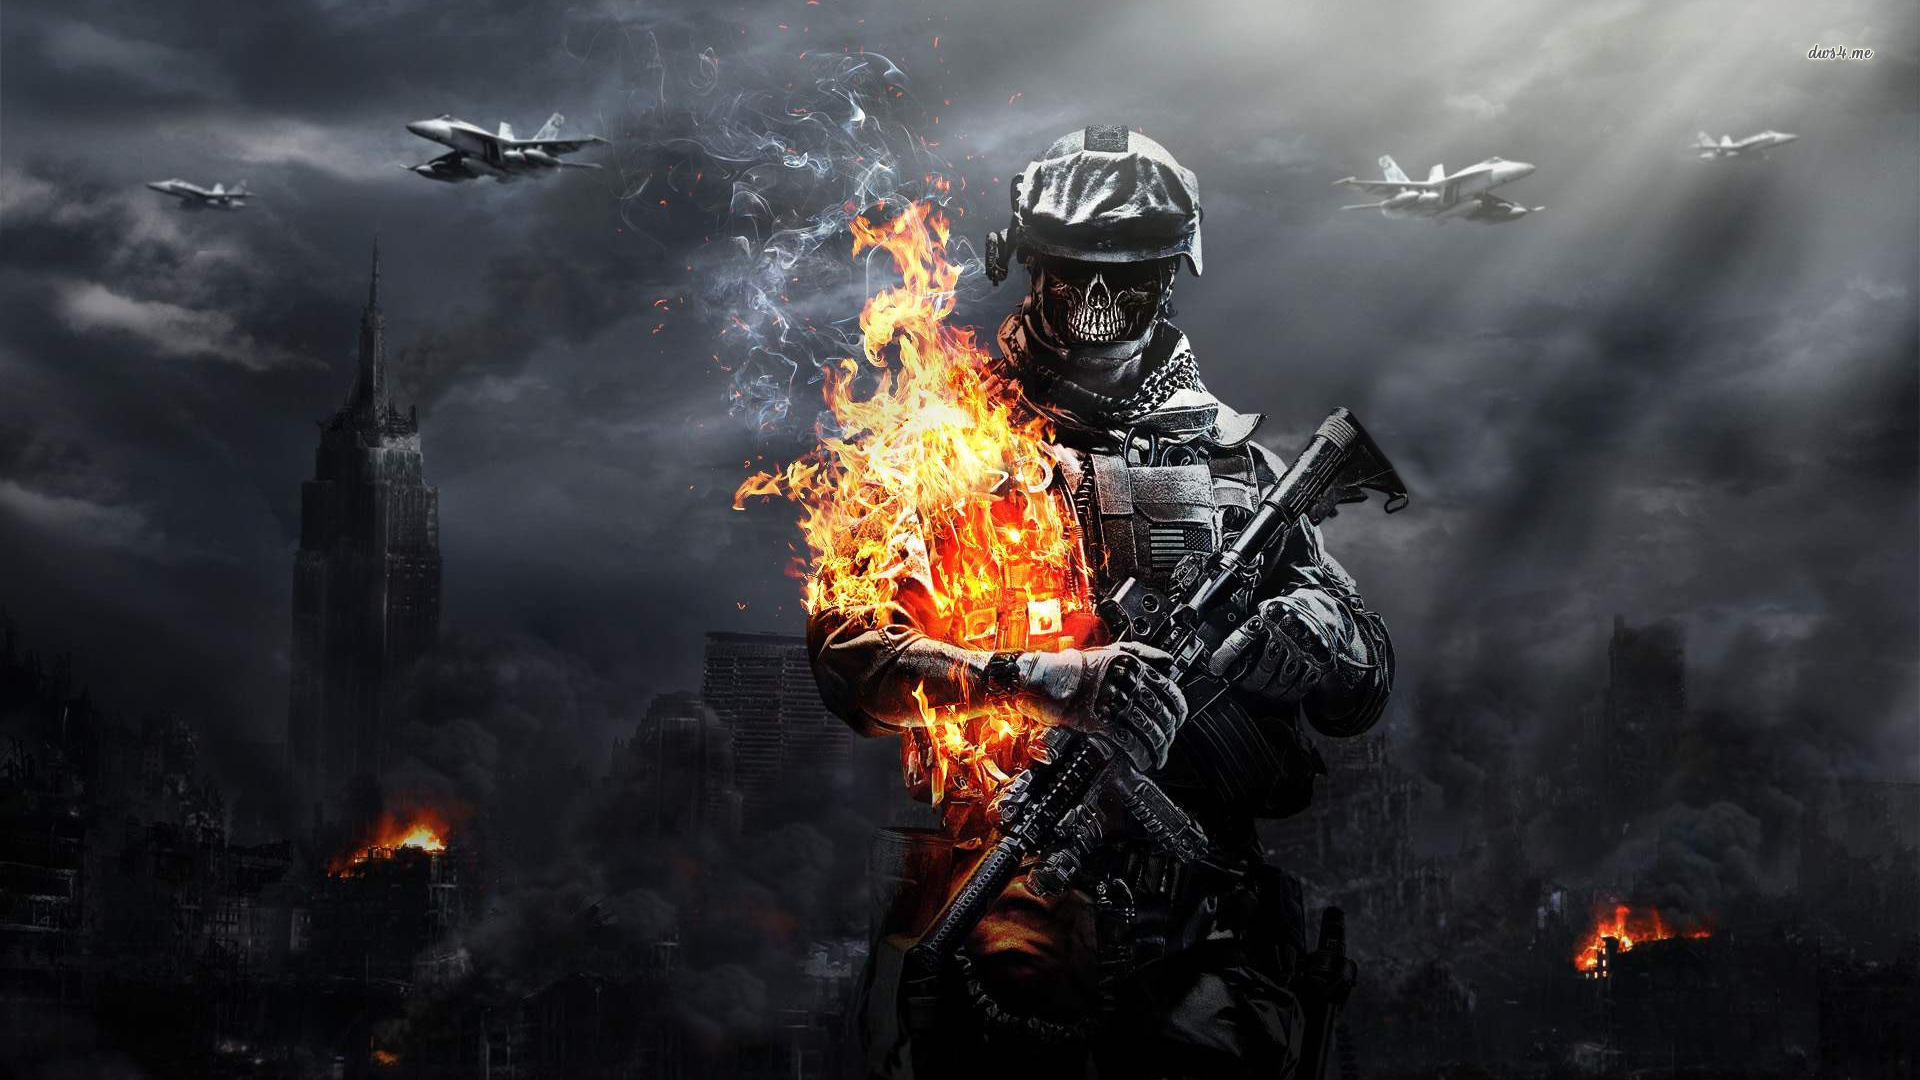 Download Pc Gaming Cold Battlefield Wallpaper